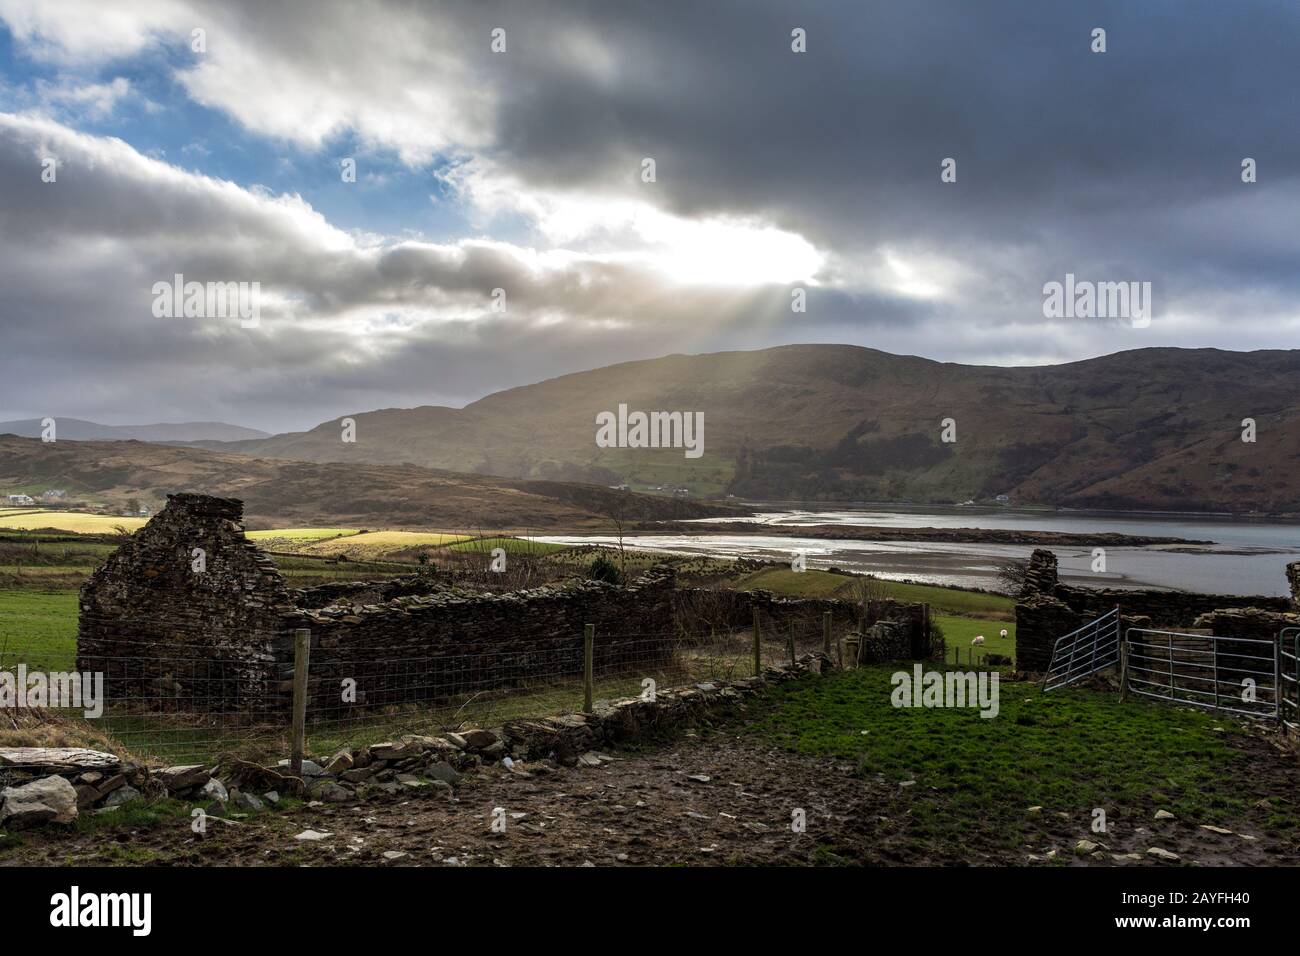 Old ruins and farmland in rural Ireland, Ardara, County Donegal. Stock Photo